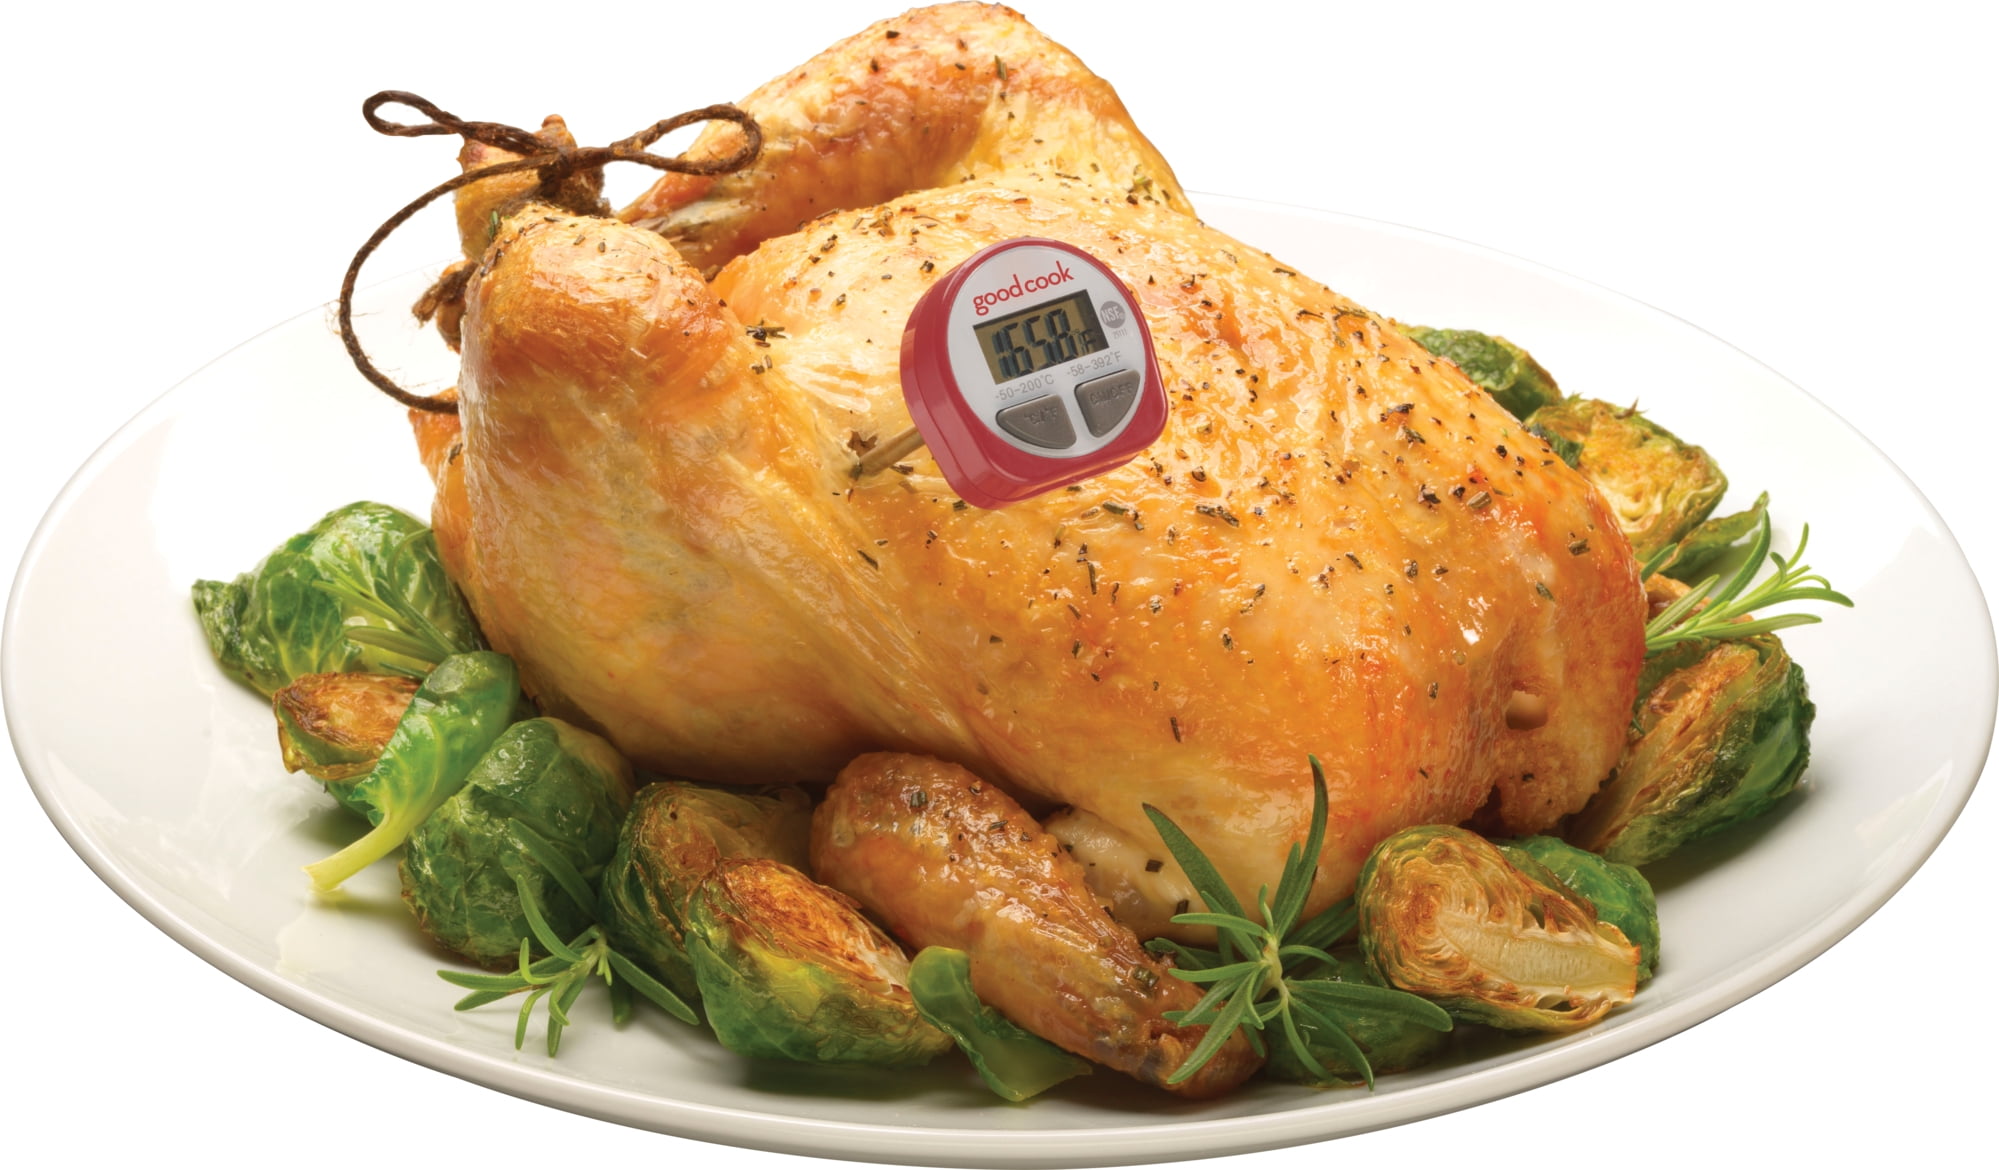 3.5 Dial Quick Read Meat Thermometer for Cooking - NSF Approved